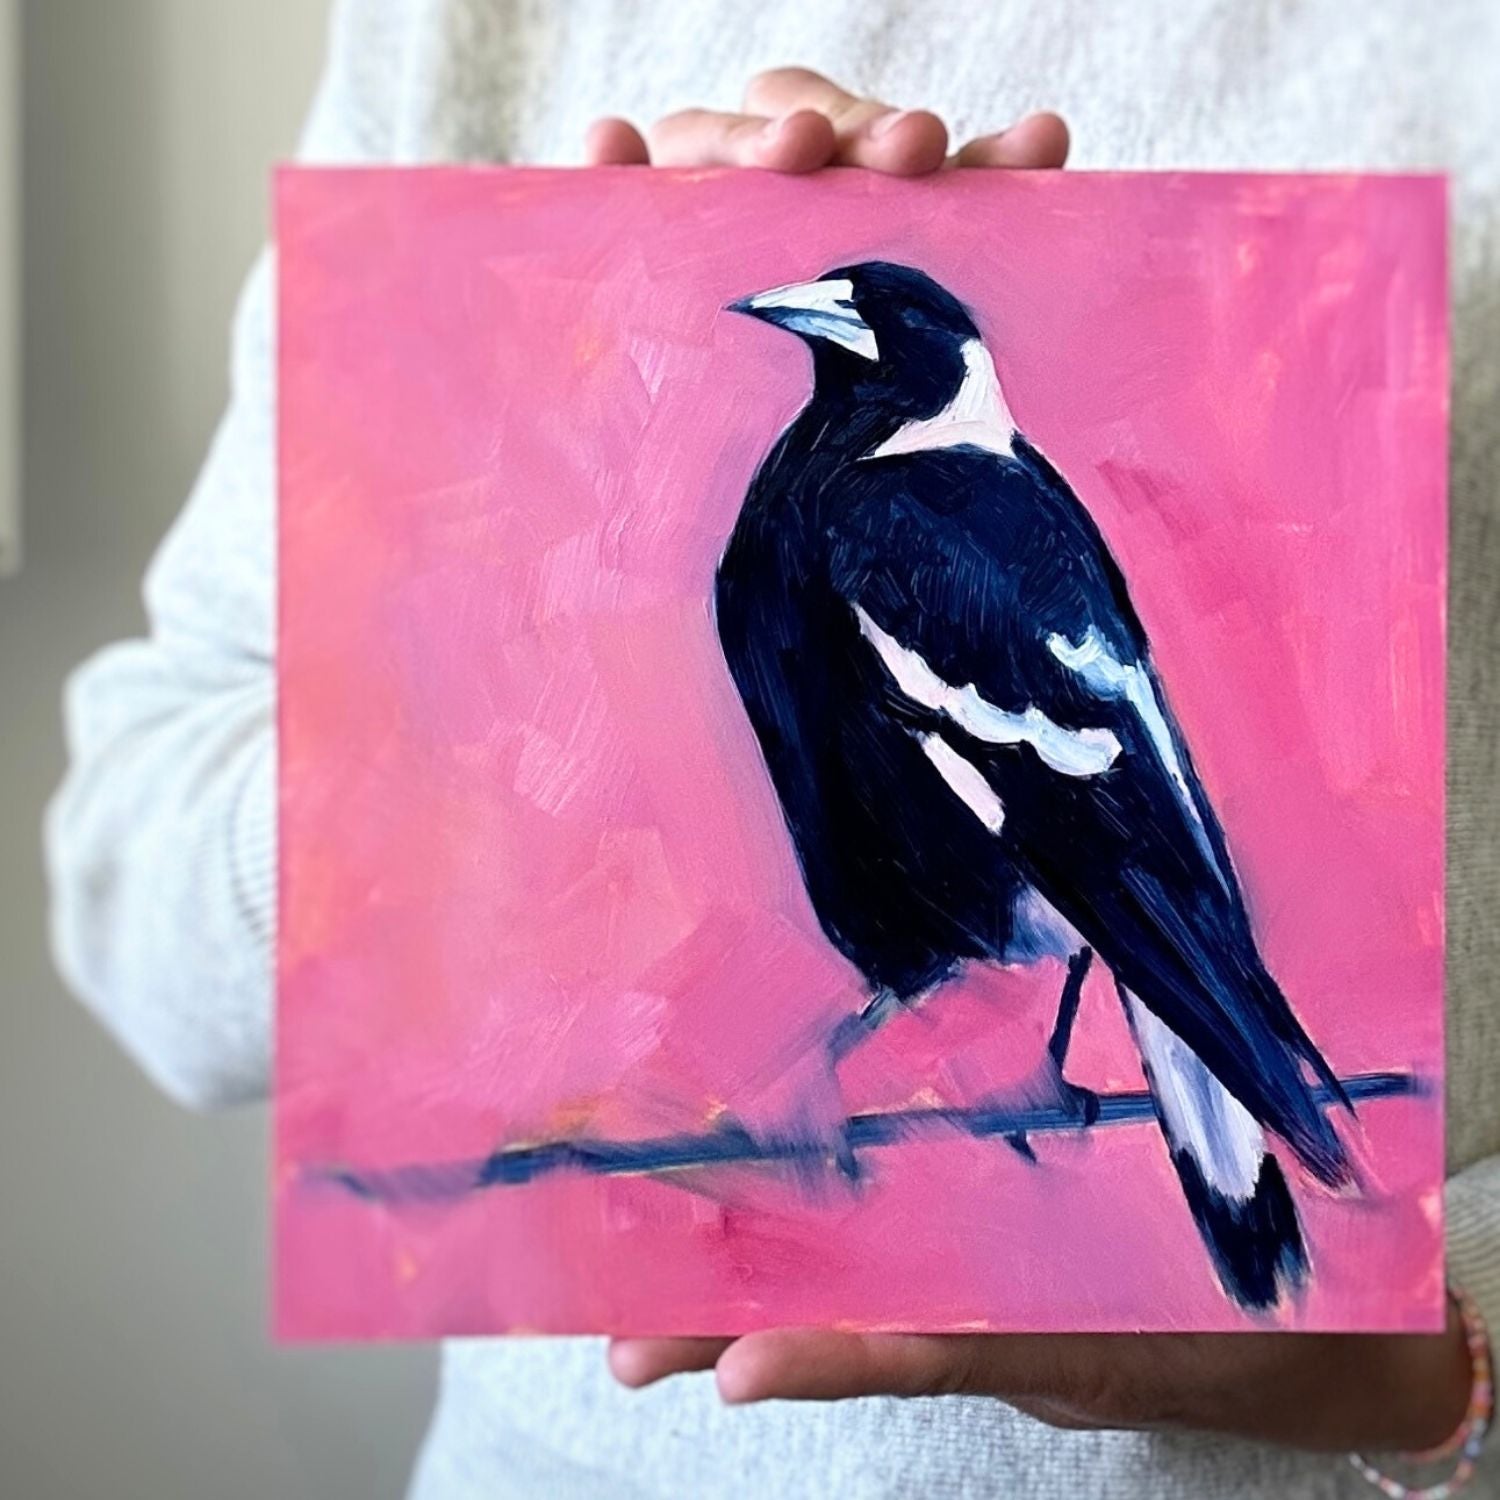 photo of a person holding an original oil painting of a navy blue and white magpie on a textured bright pink background 